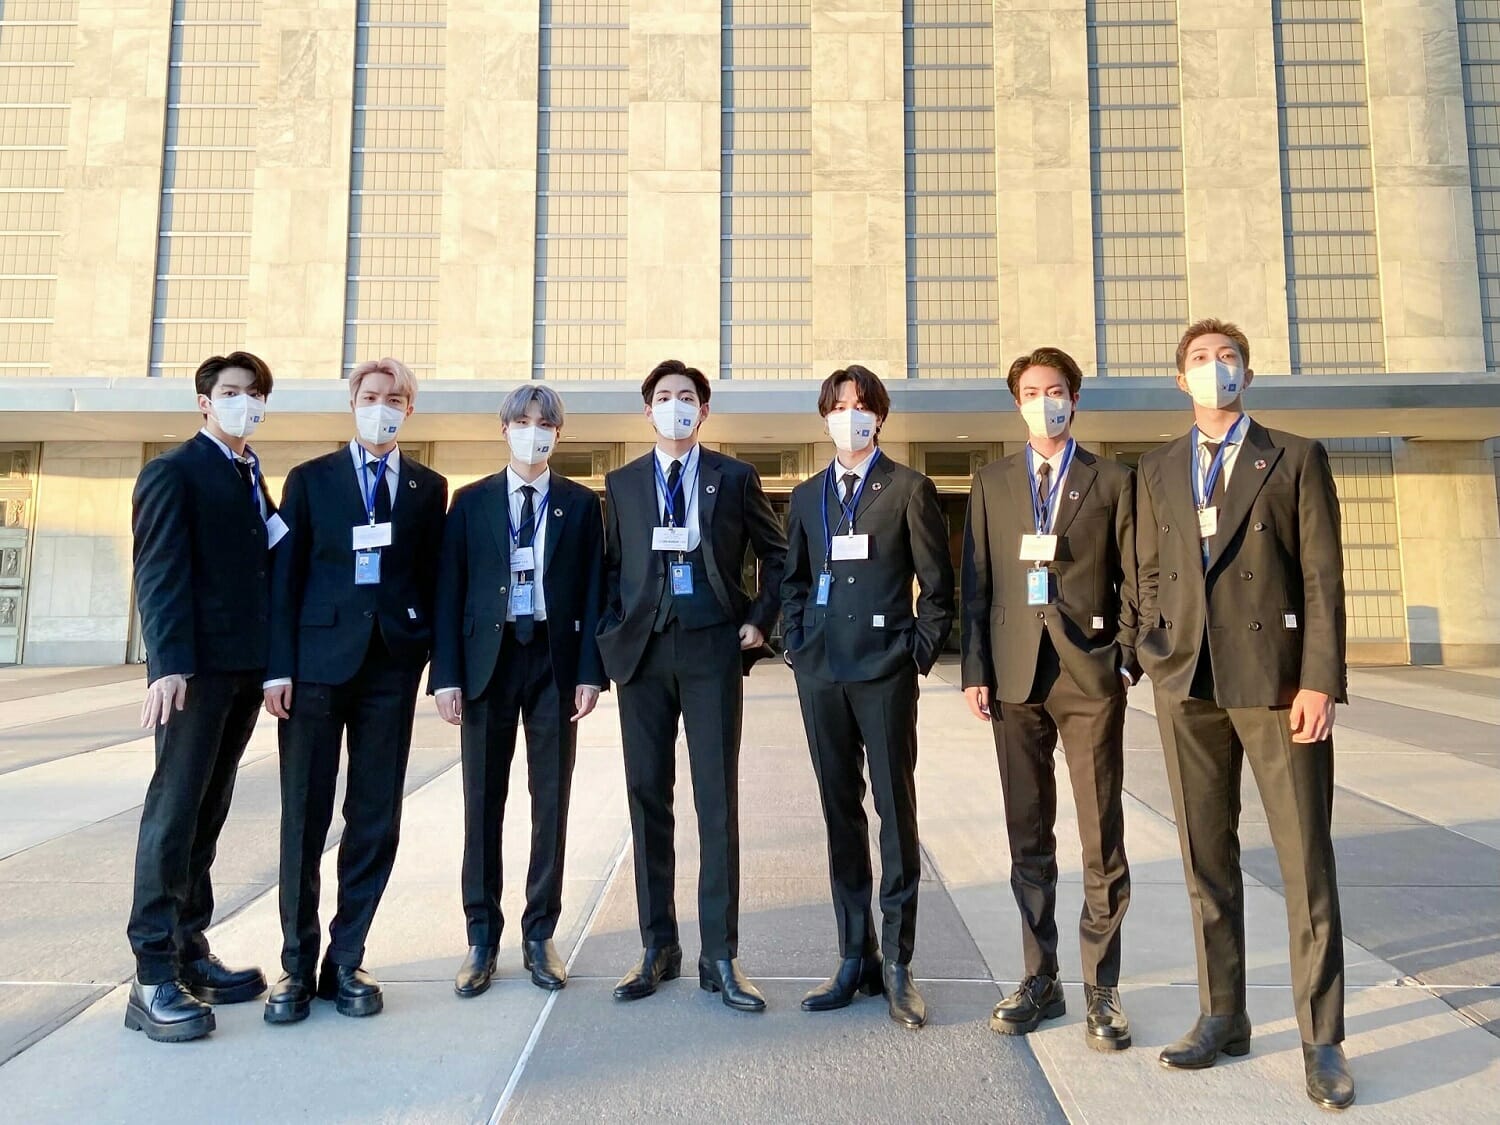 BTS address the United Nations and perform 'Permission to Dance